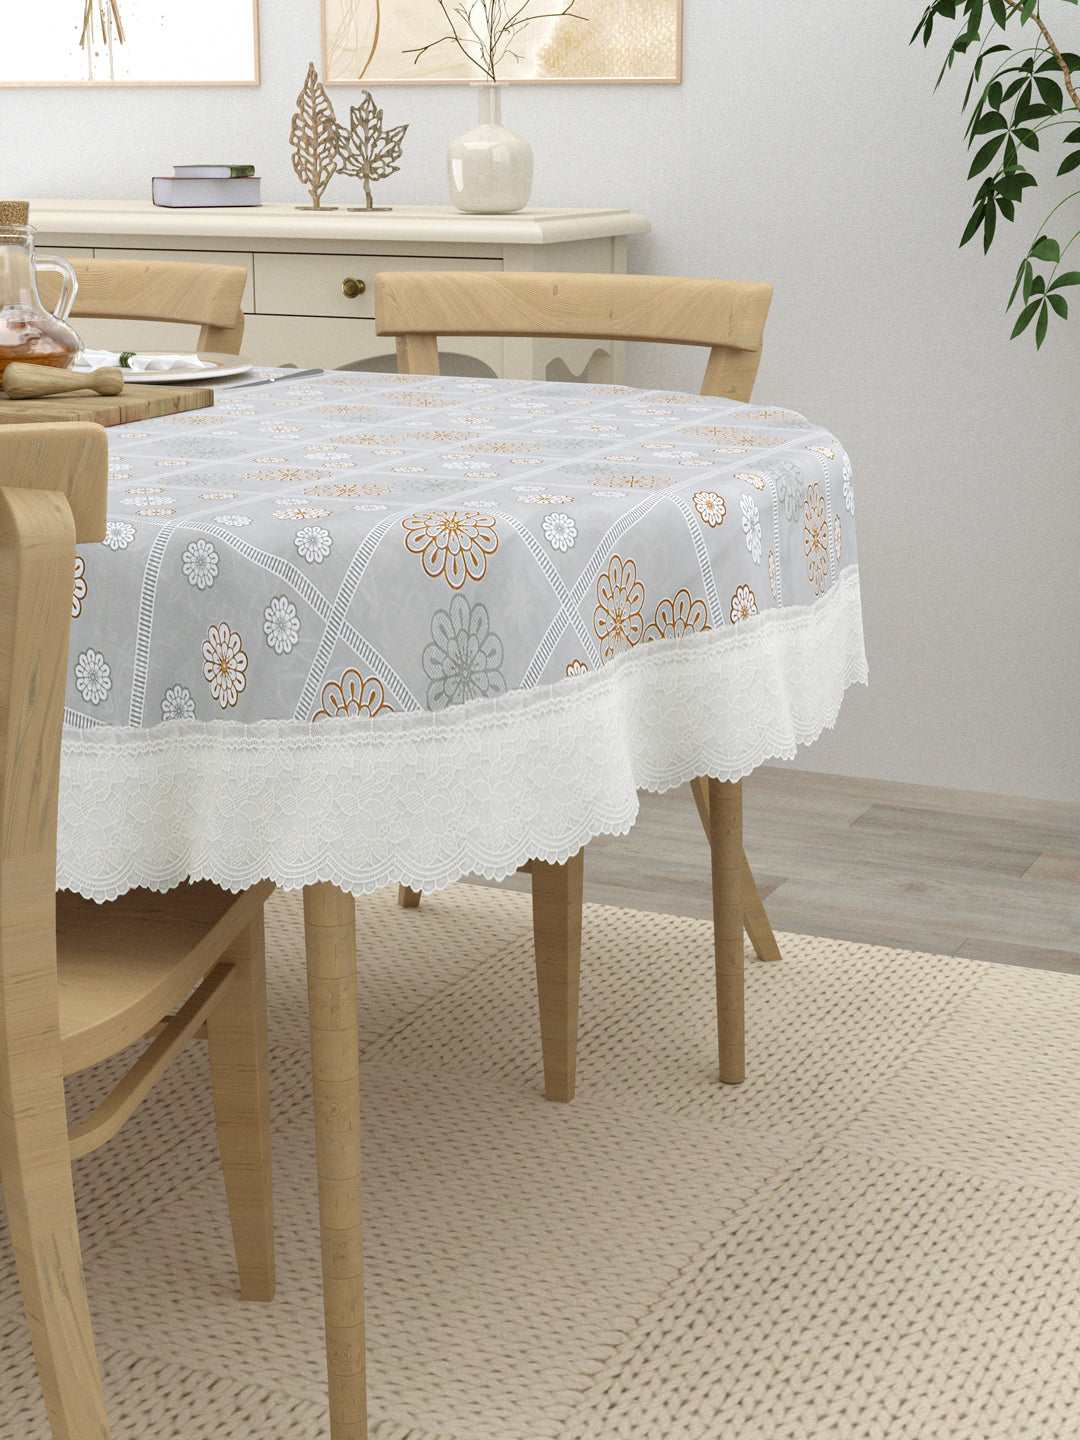 4 Seater Oval Dining Table Cover; 54x78 Inches; Material - PVC; Anti Slip; Golden Print On Grey